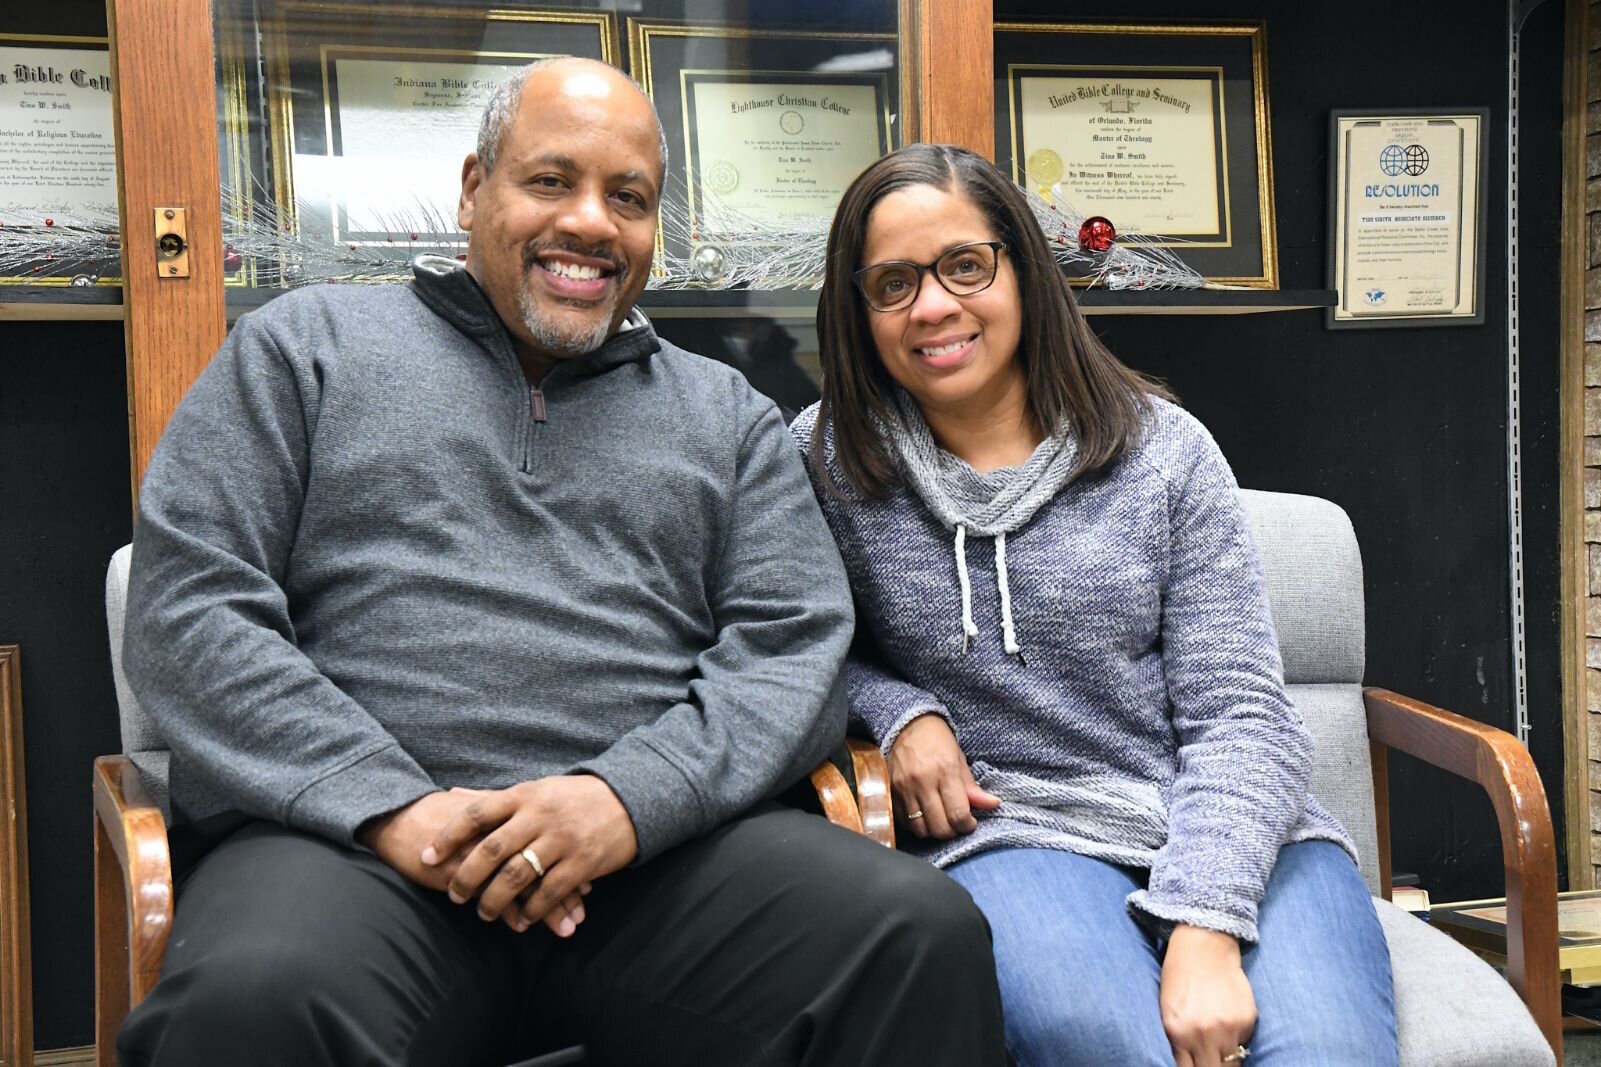 Dr. Tino and Nicole Smith sit in the hallway at Kingdom Builders Worldwide, which formerly housed Southeastern Middle School.